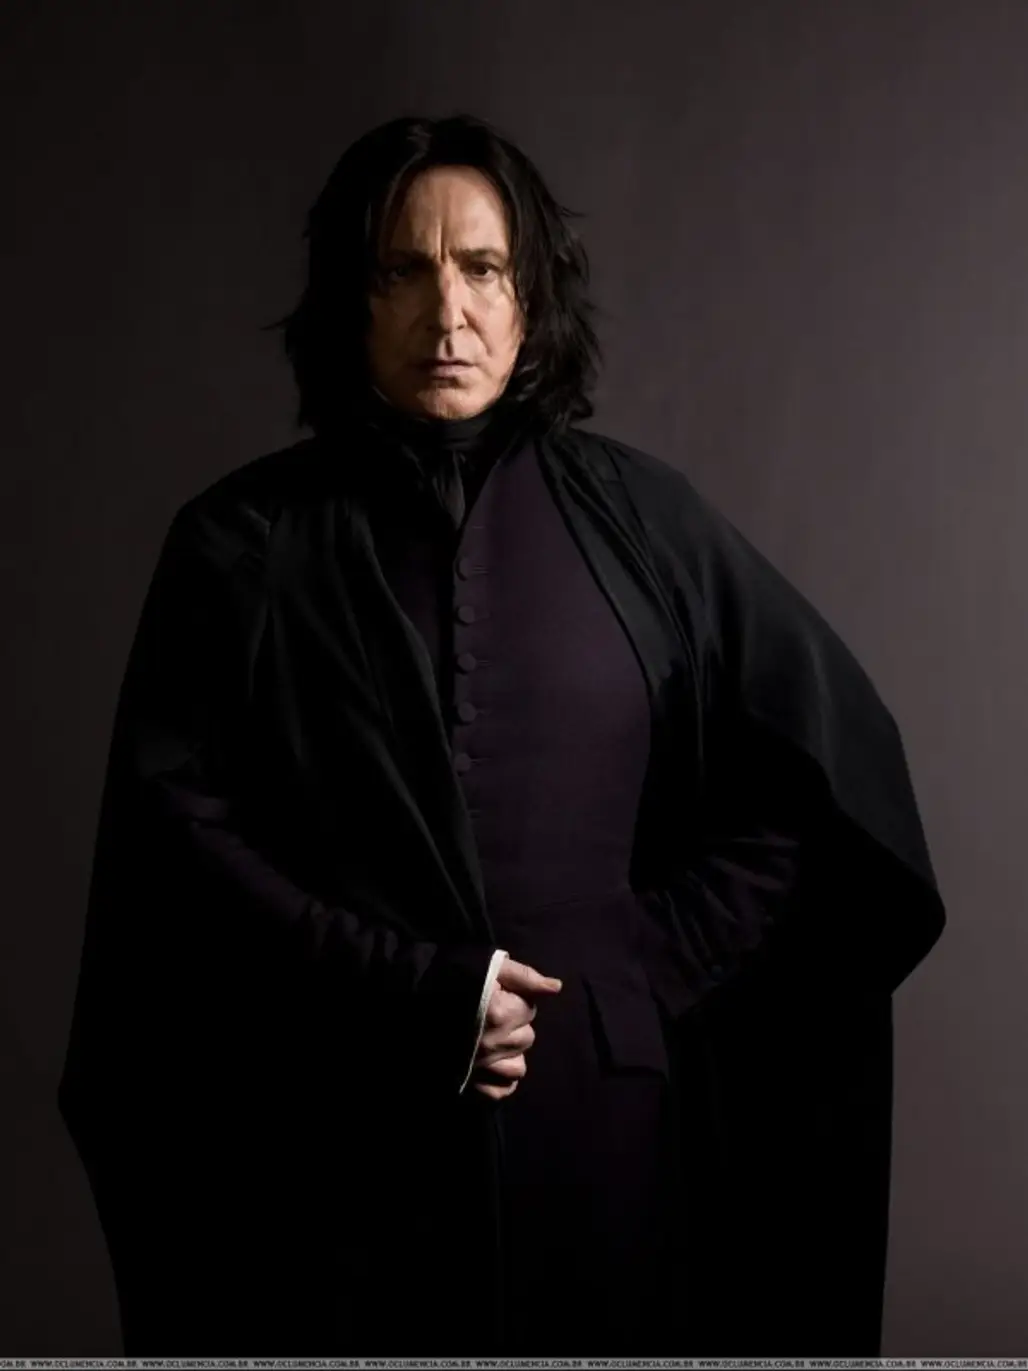 Snape from Harry Potter